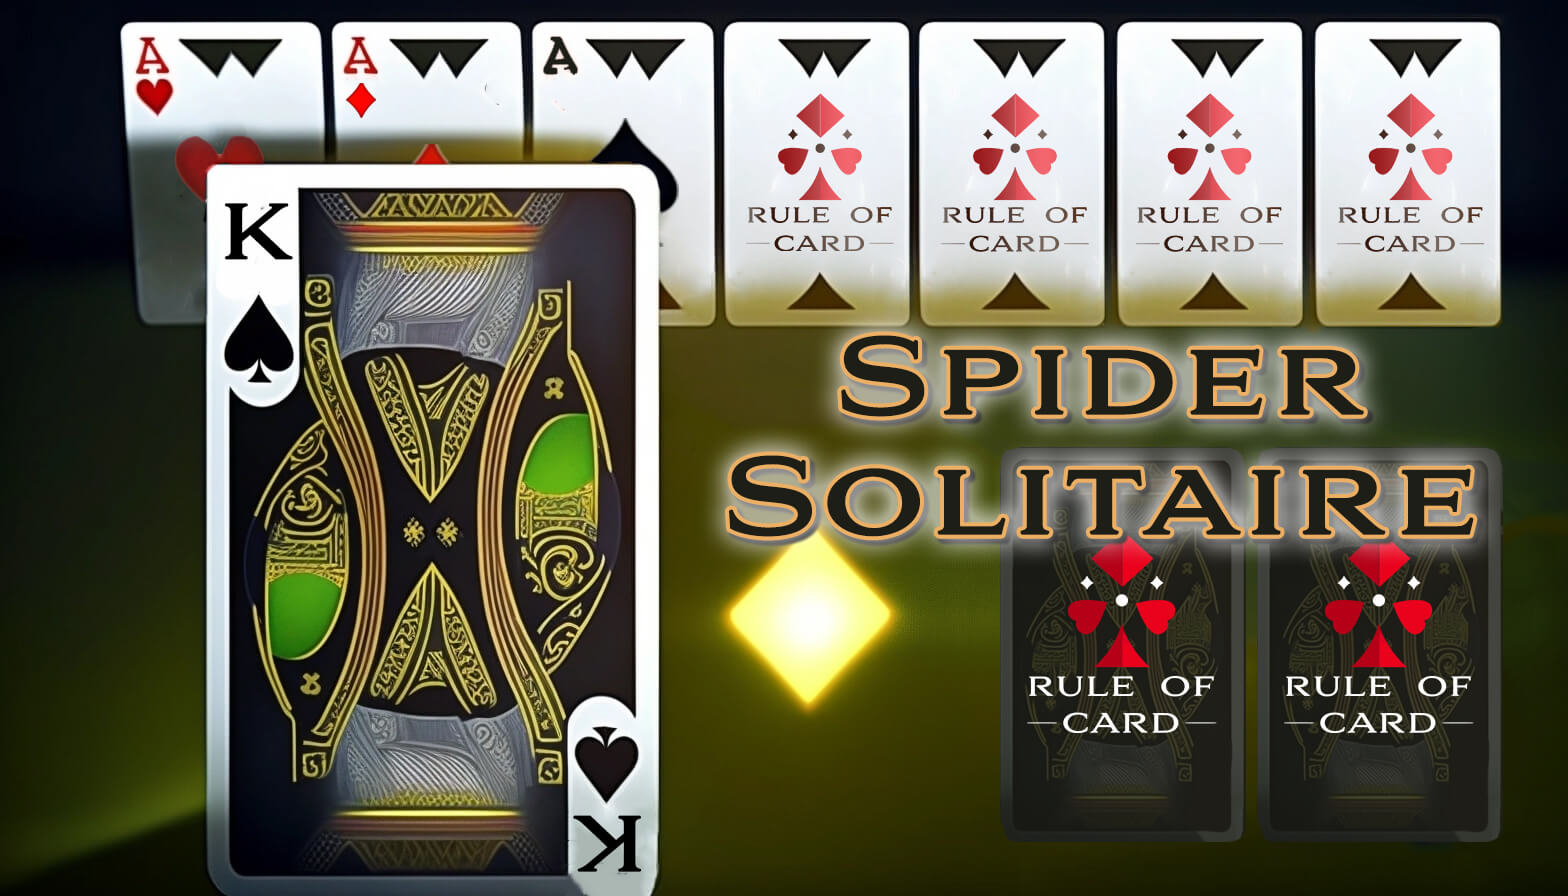 Playing the card game Spider Solitaire